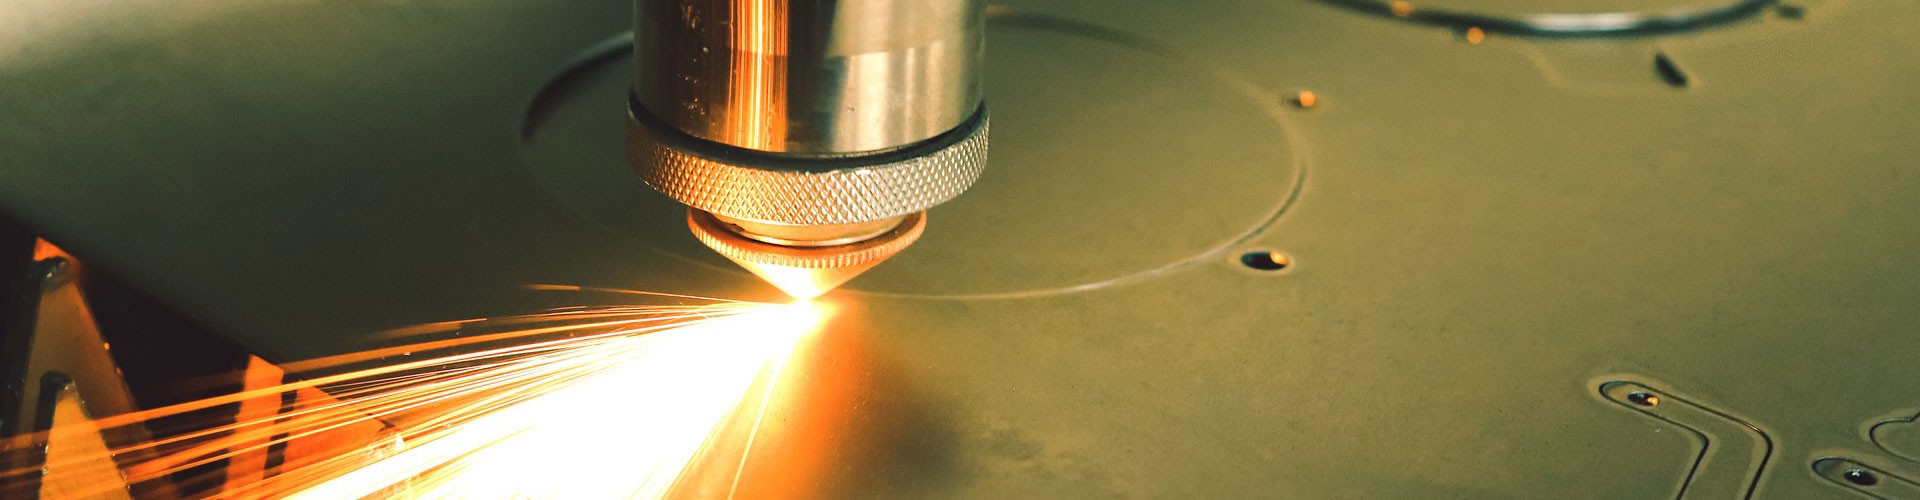 laser cutter close up with sparks